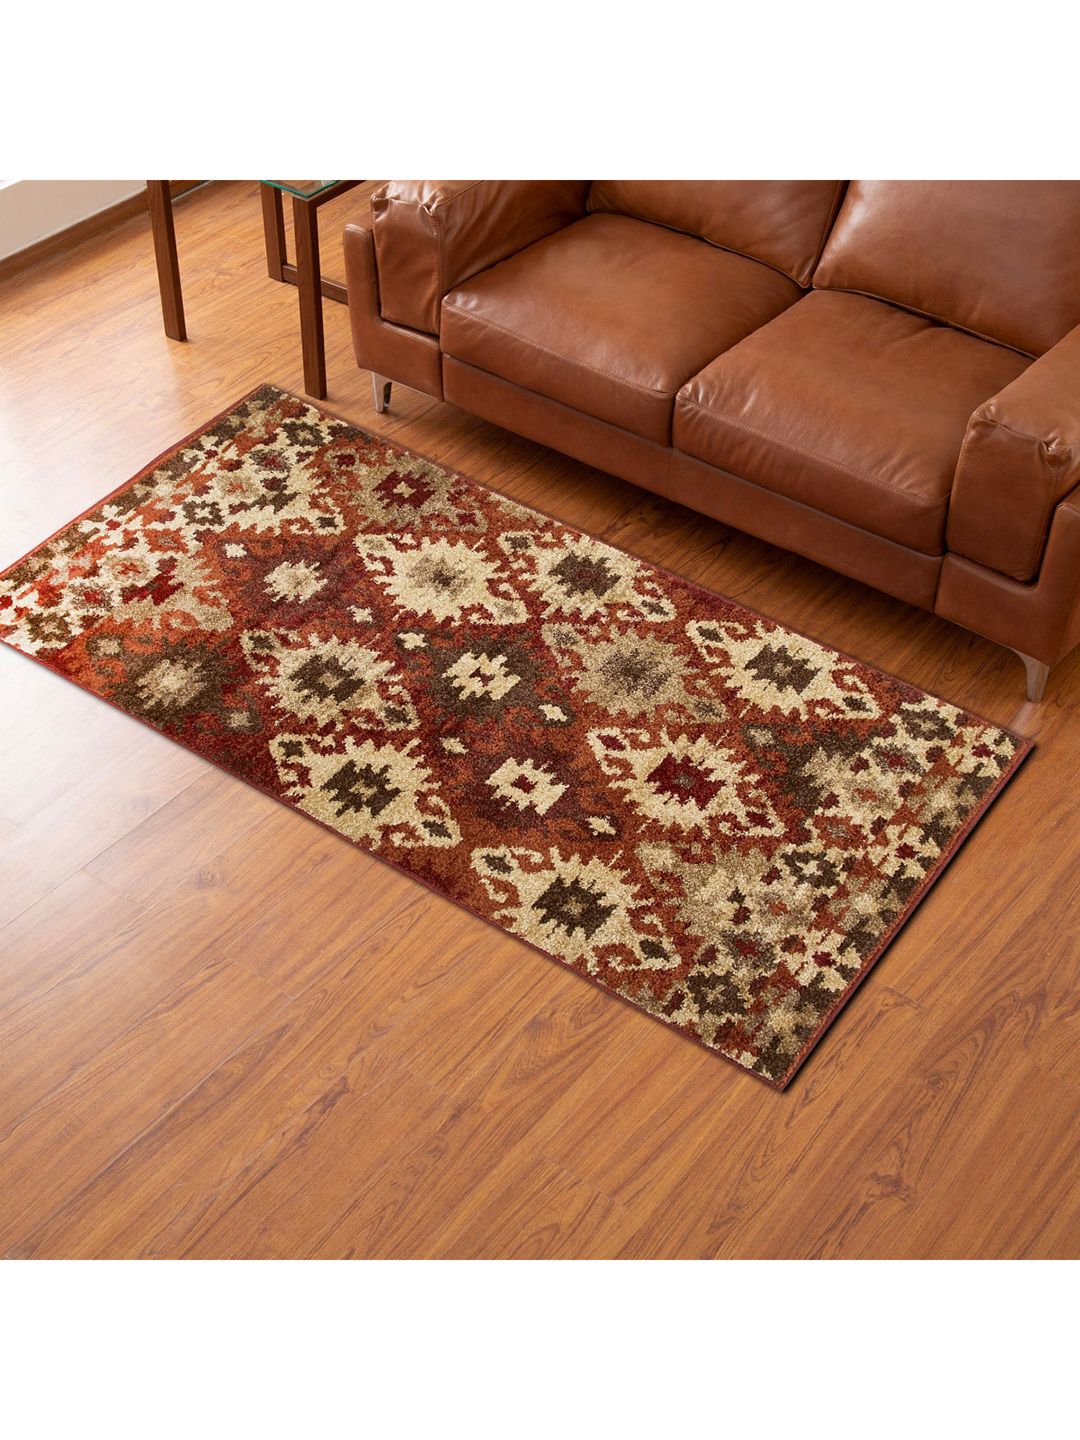 Home Centre Brown & Maroon Patterned Rectangular Anti-Skid Carpet Price in India